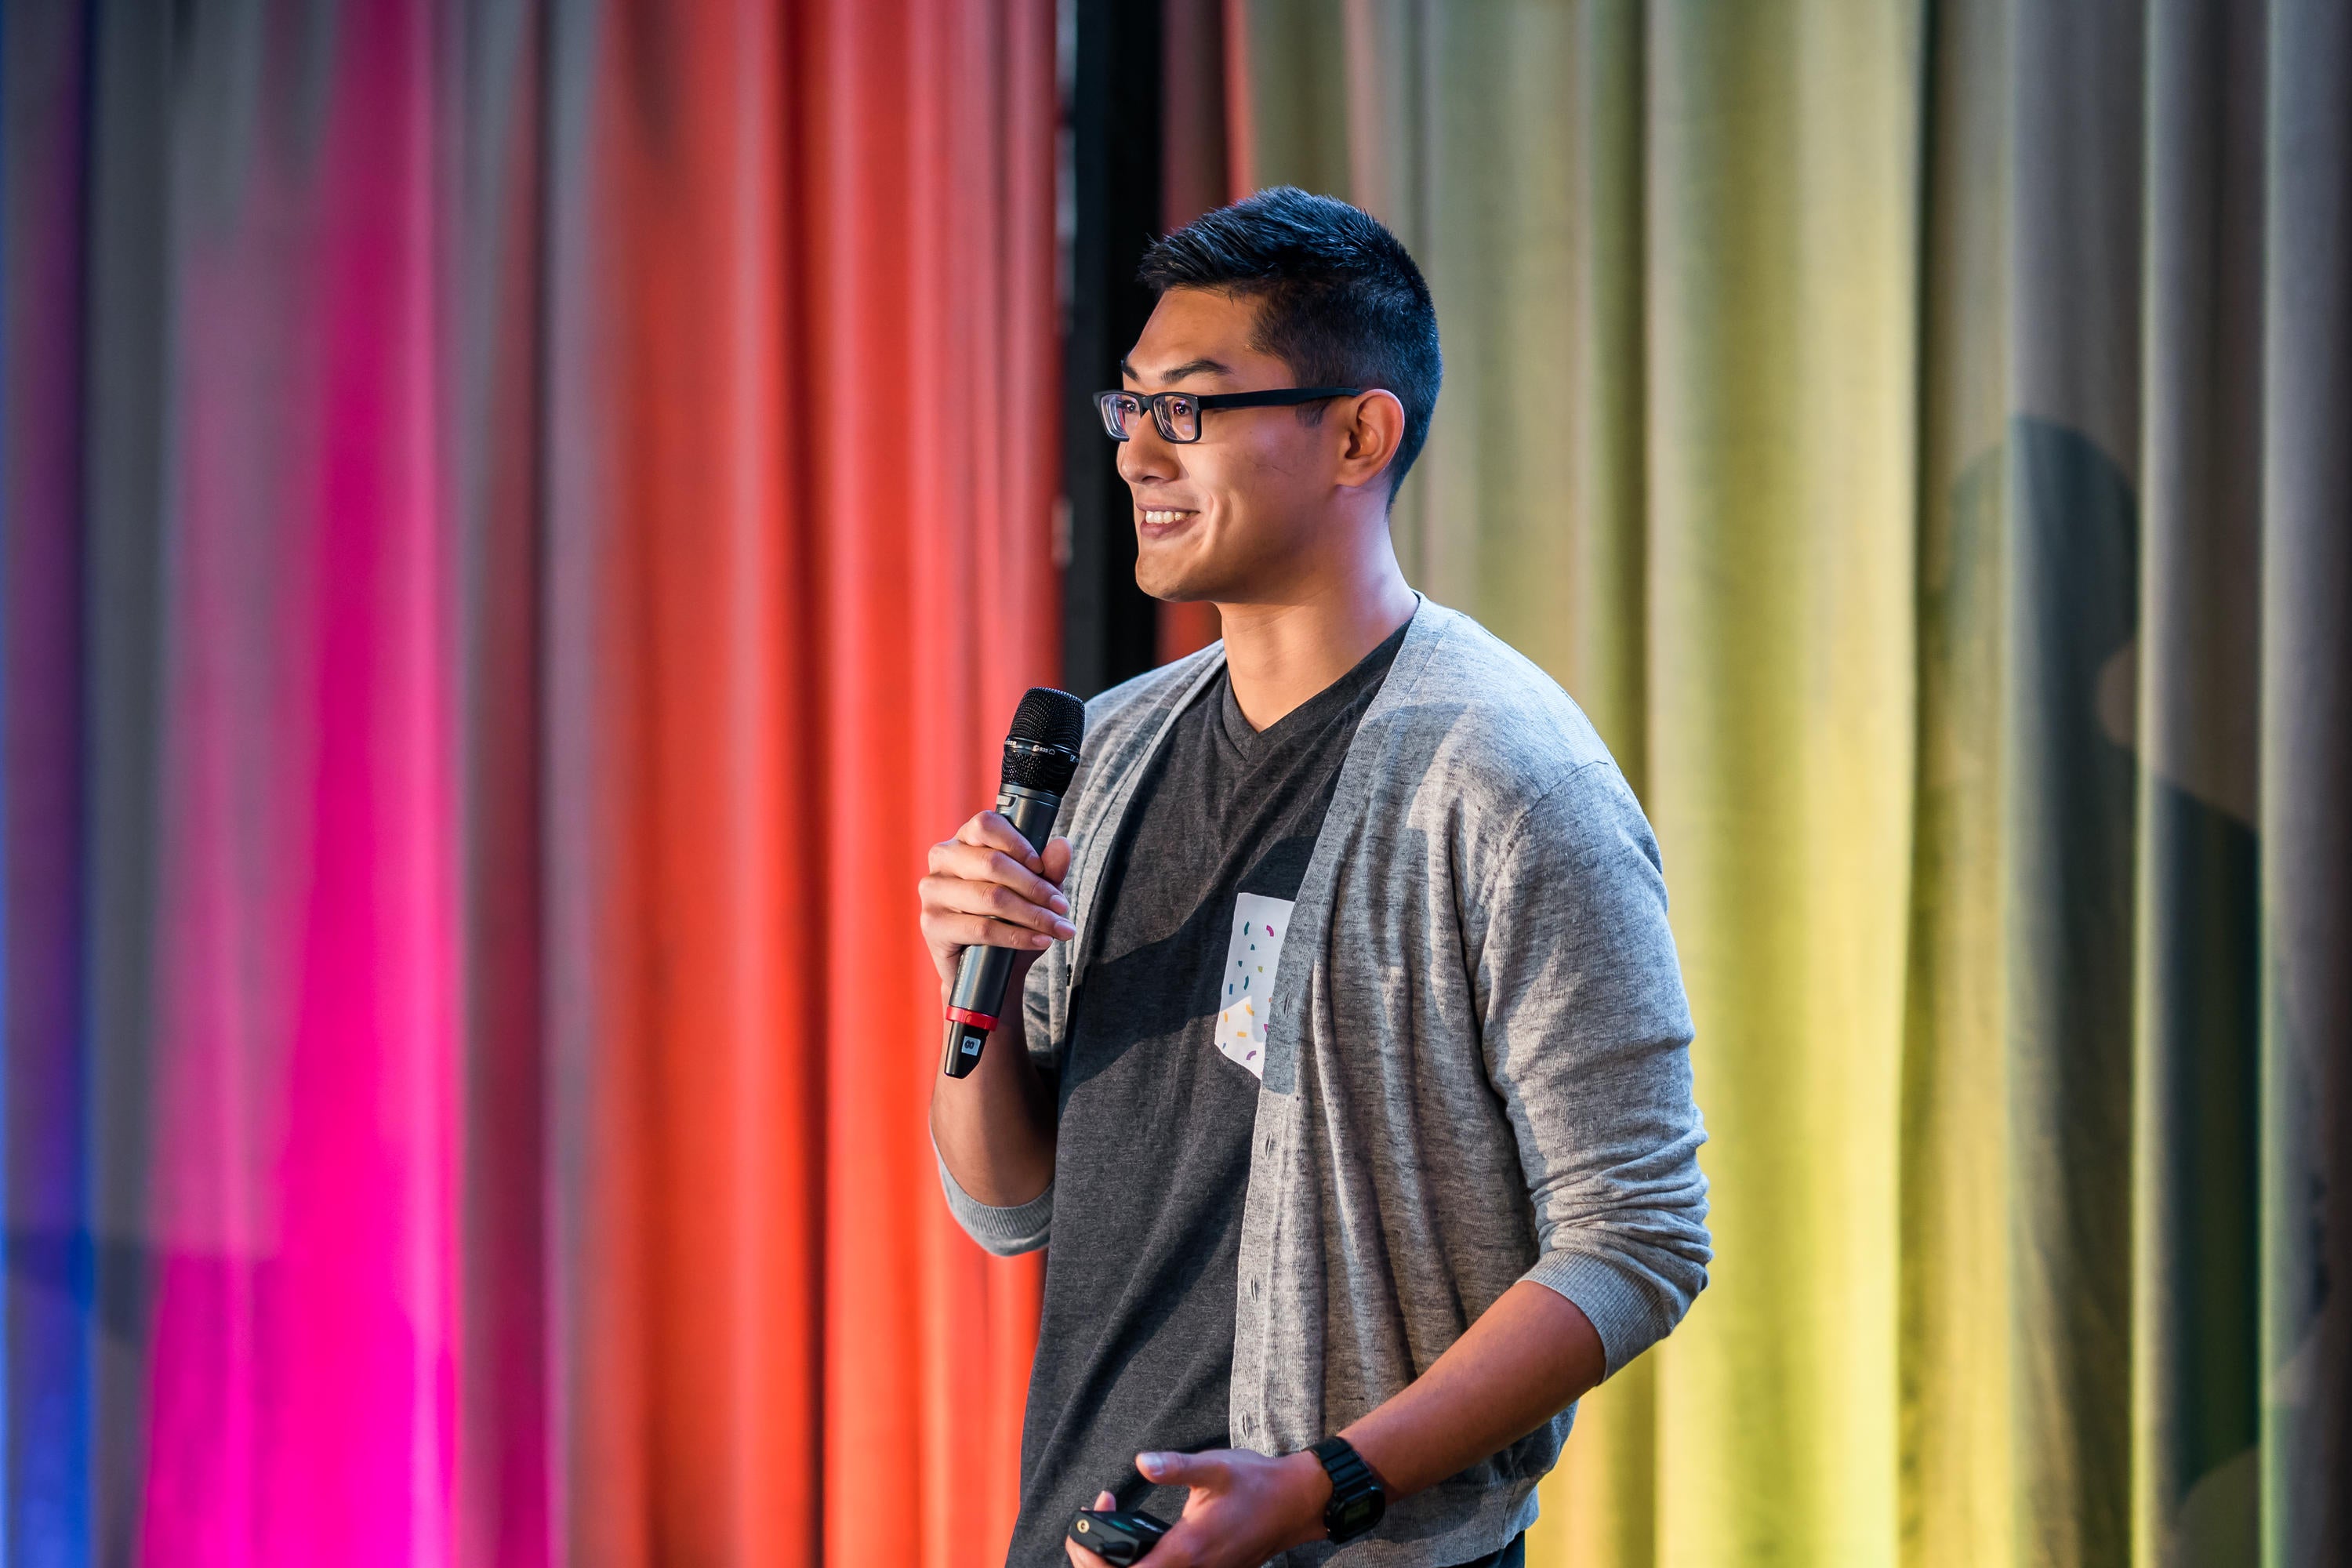 Flowy co-founder David Zhao presents at the Concept $5K final